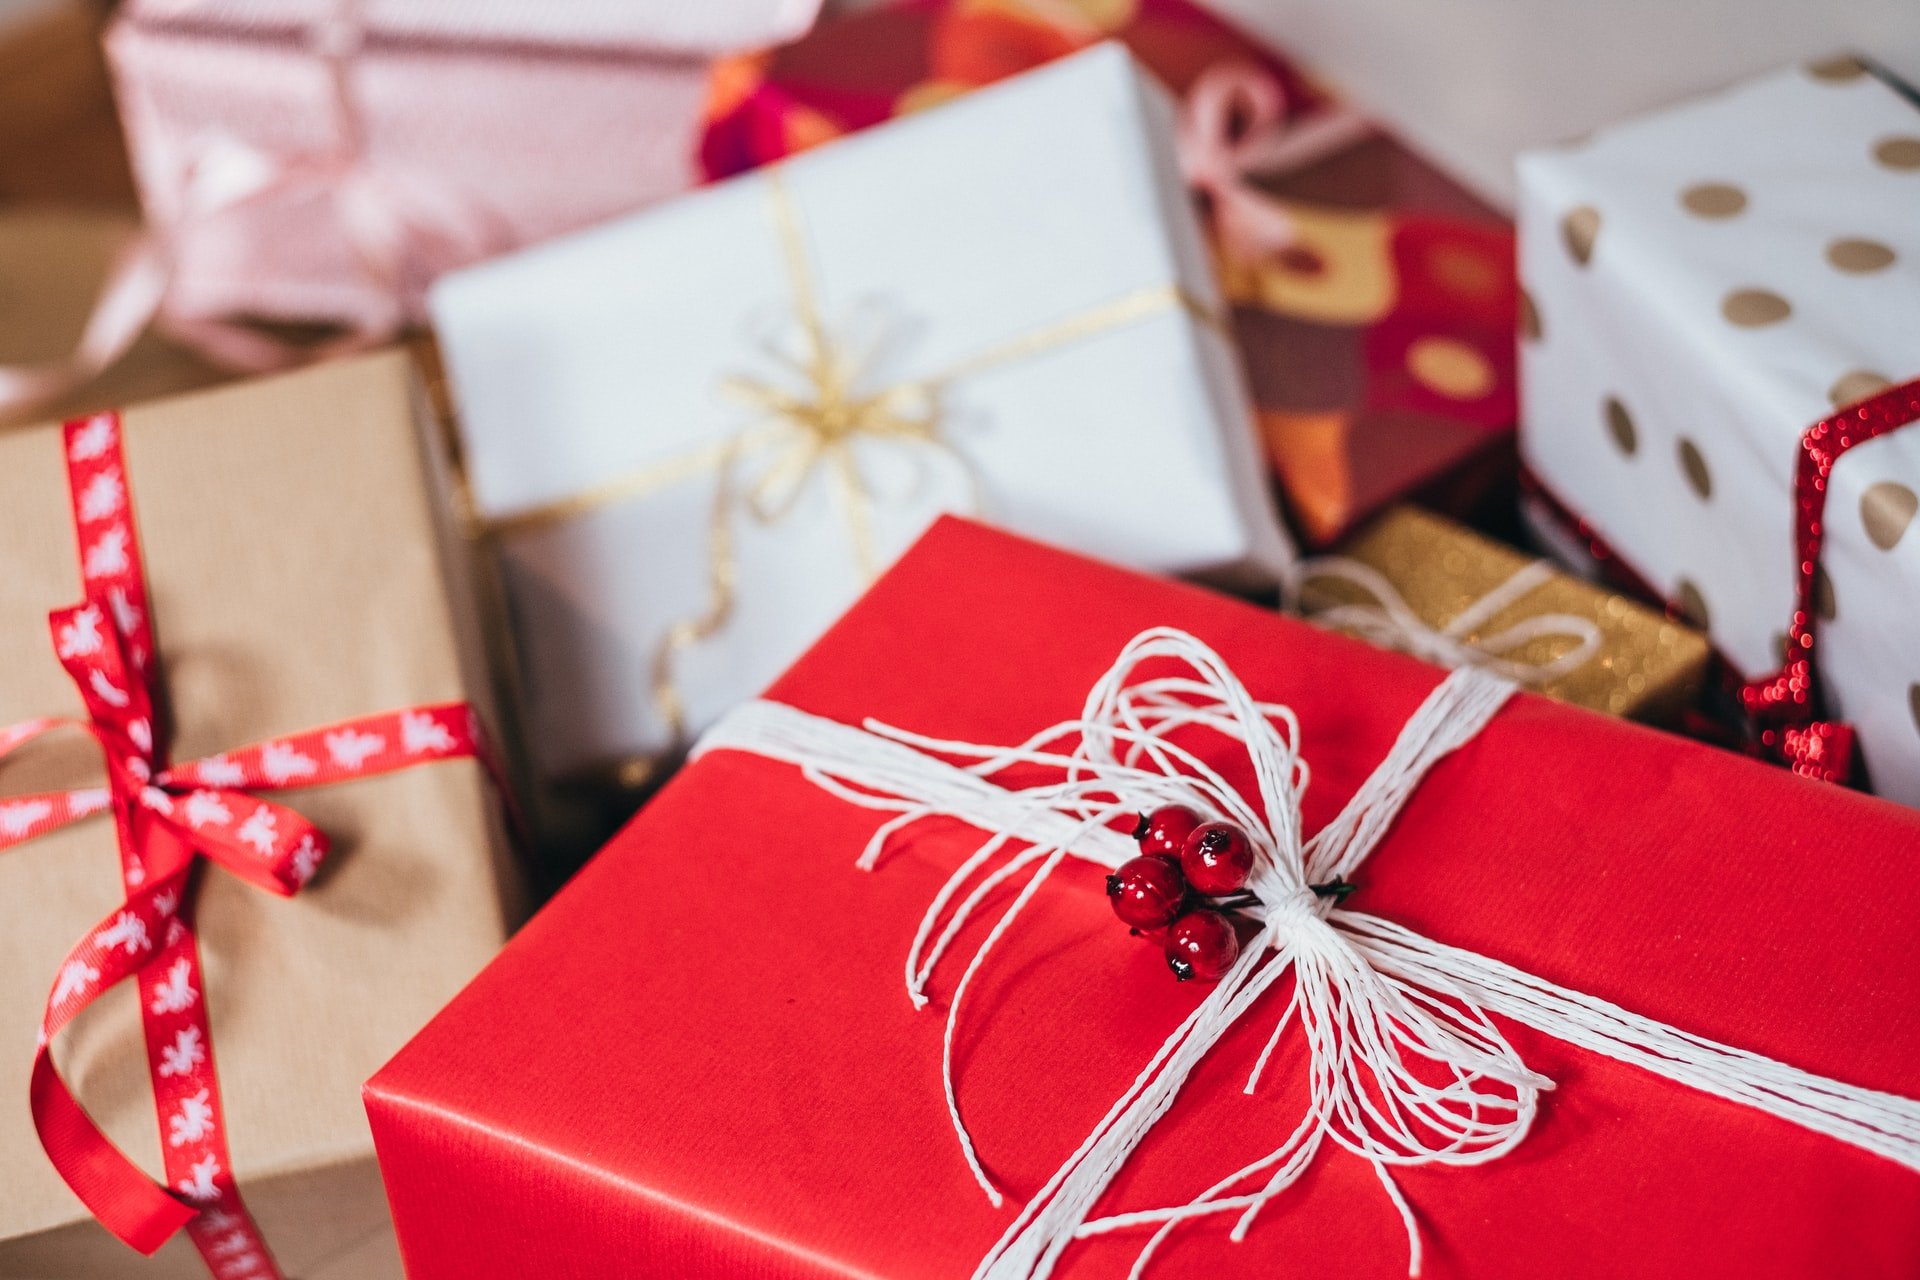 OP's grandfather sent Christmas gifts to all his grandchildren | Source: Unsplash